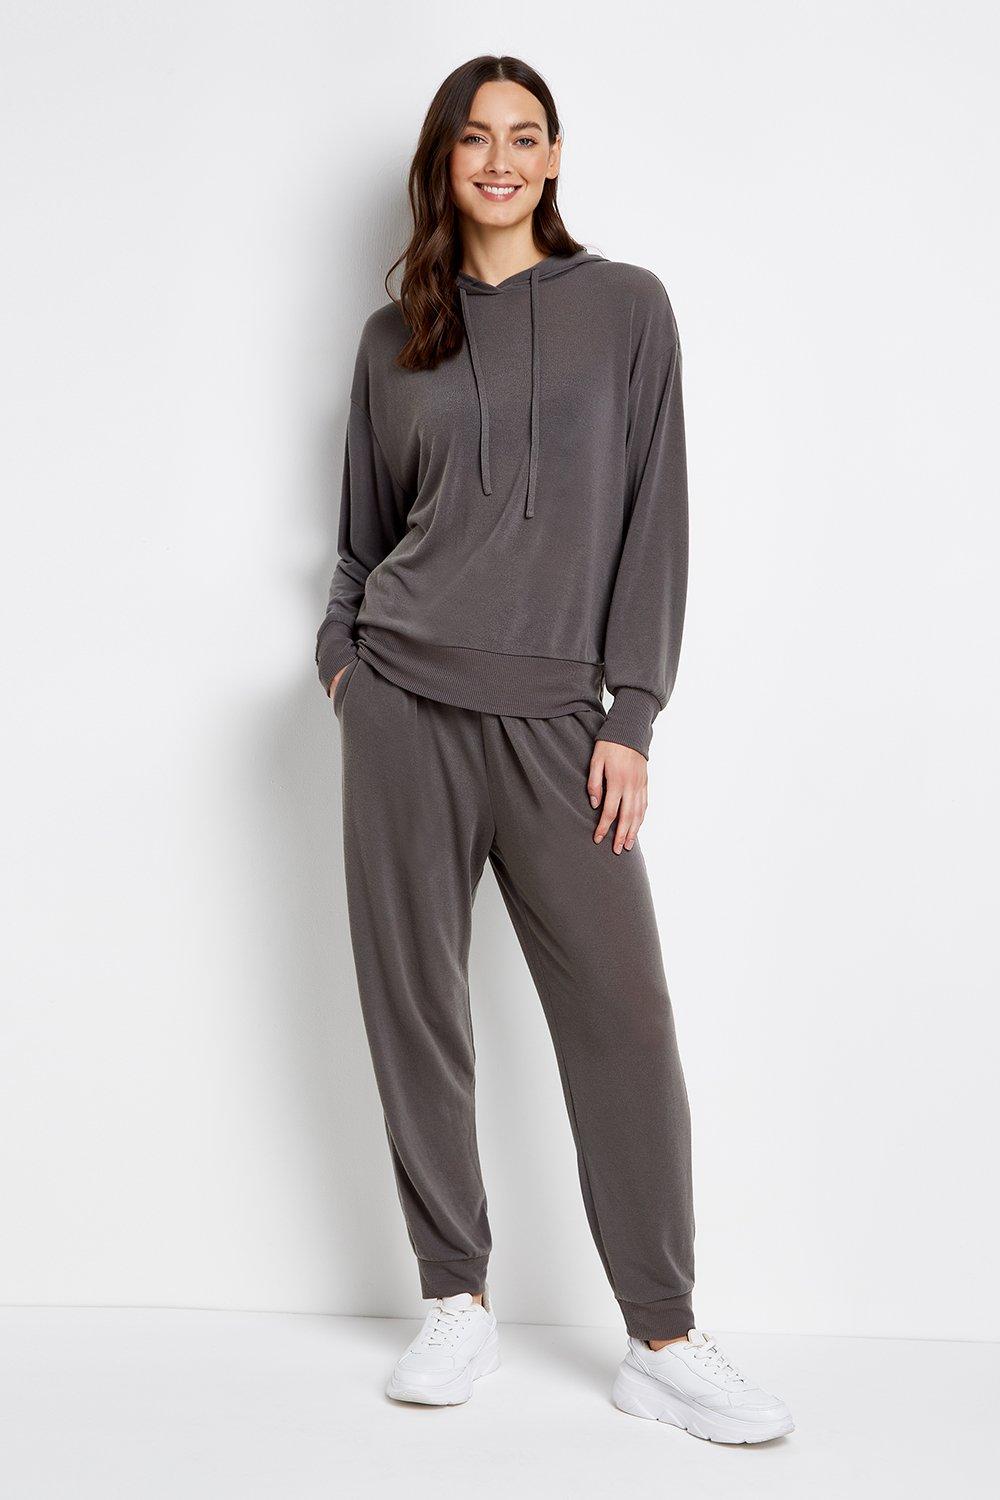 Loungewear Is A Must-Have This Season, And These Grey Joggers Are The Perfect Pair To Add To Your Collection. A Relaxed Fit And Grey Finish Keep Them Cosy And Easy To Wear, Just Team With The Matching Hoodie And Trainers To Complete The Look.  Joggers Rel